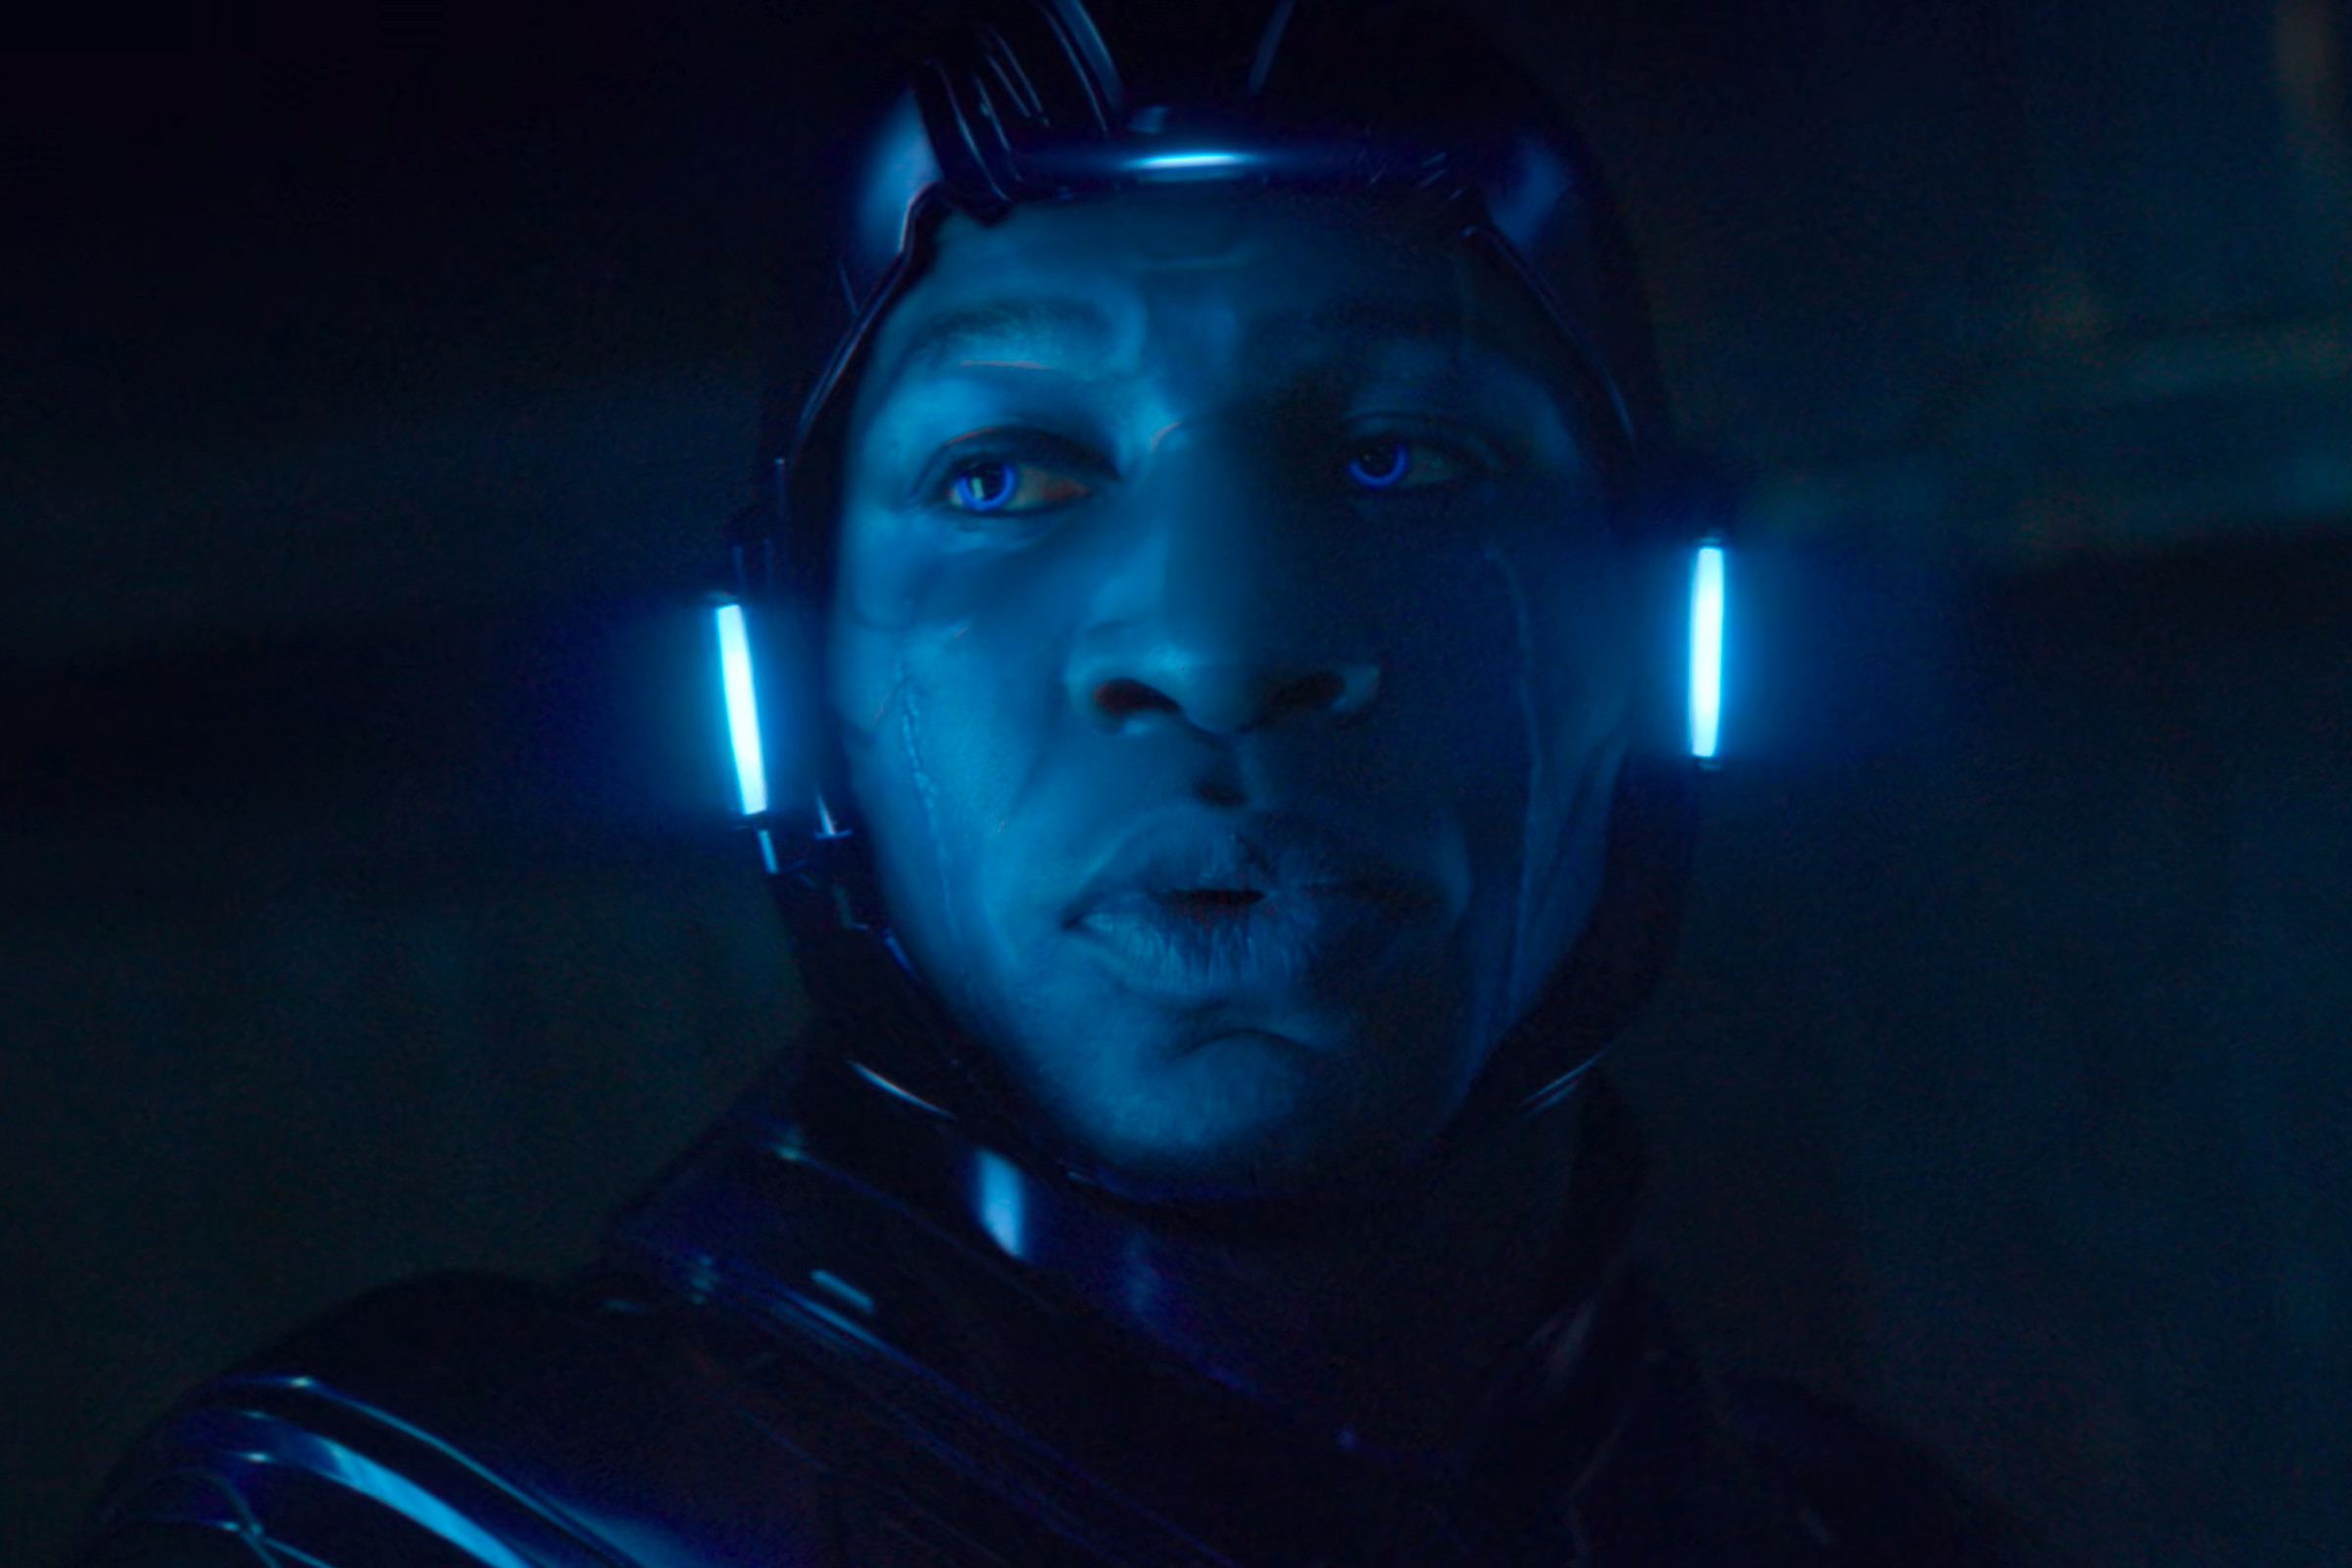 A tight shot of a man wearing a formfitting helmet that casts a translucent blue sheen over his face, which is visible from his hairline down to his chin.